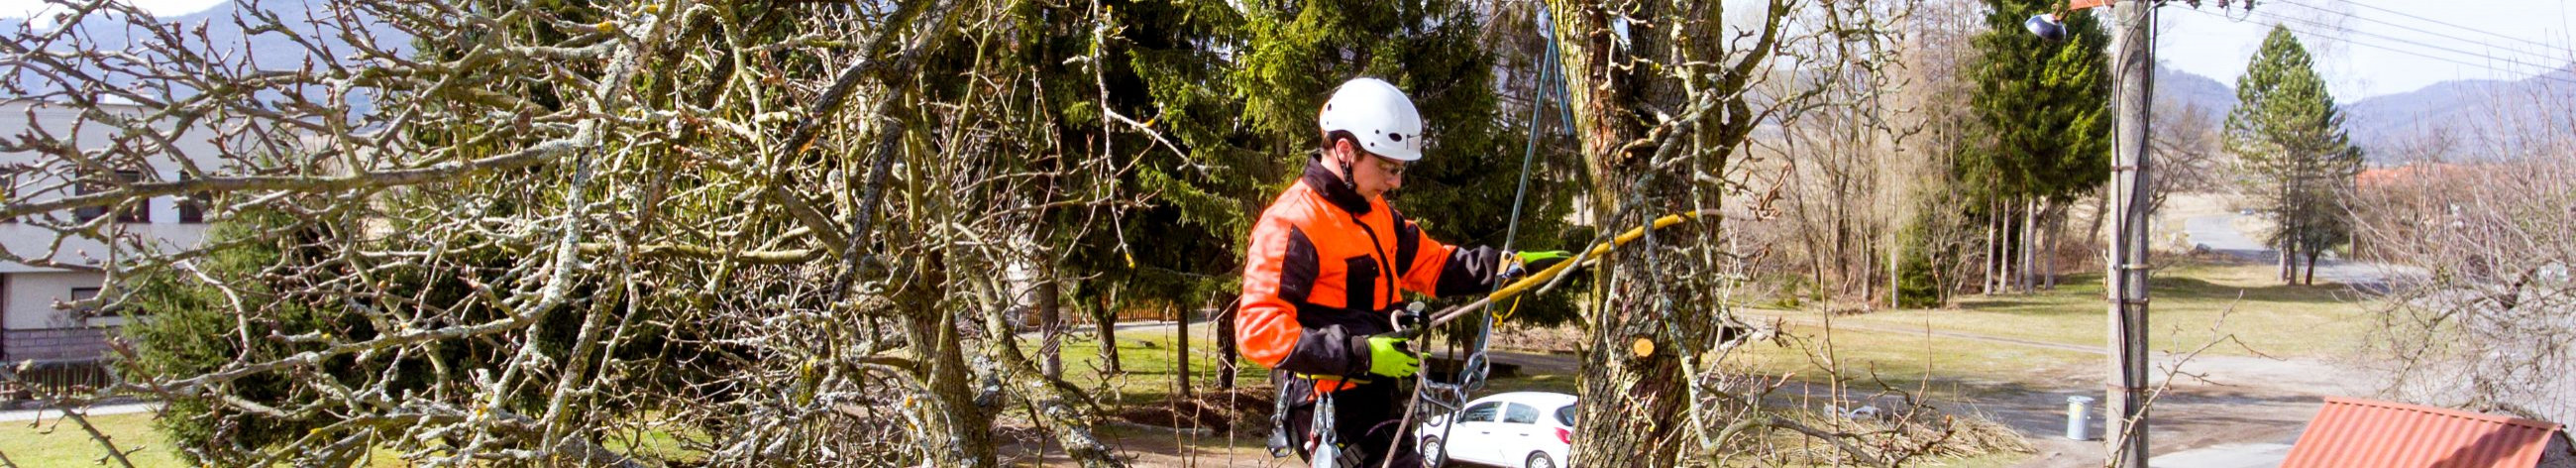 hazardous tree felling, tree care pruning, Shrubbing, stump grinding, utilisation of waste from cutting, cleaning roofs from snow and ice, planting and care of trees and shrubs, tree and shrub care, Chopping of branches, dendrological assessments